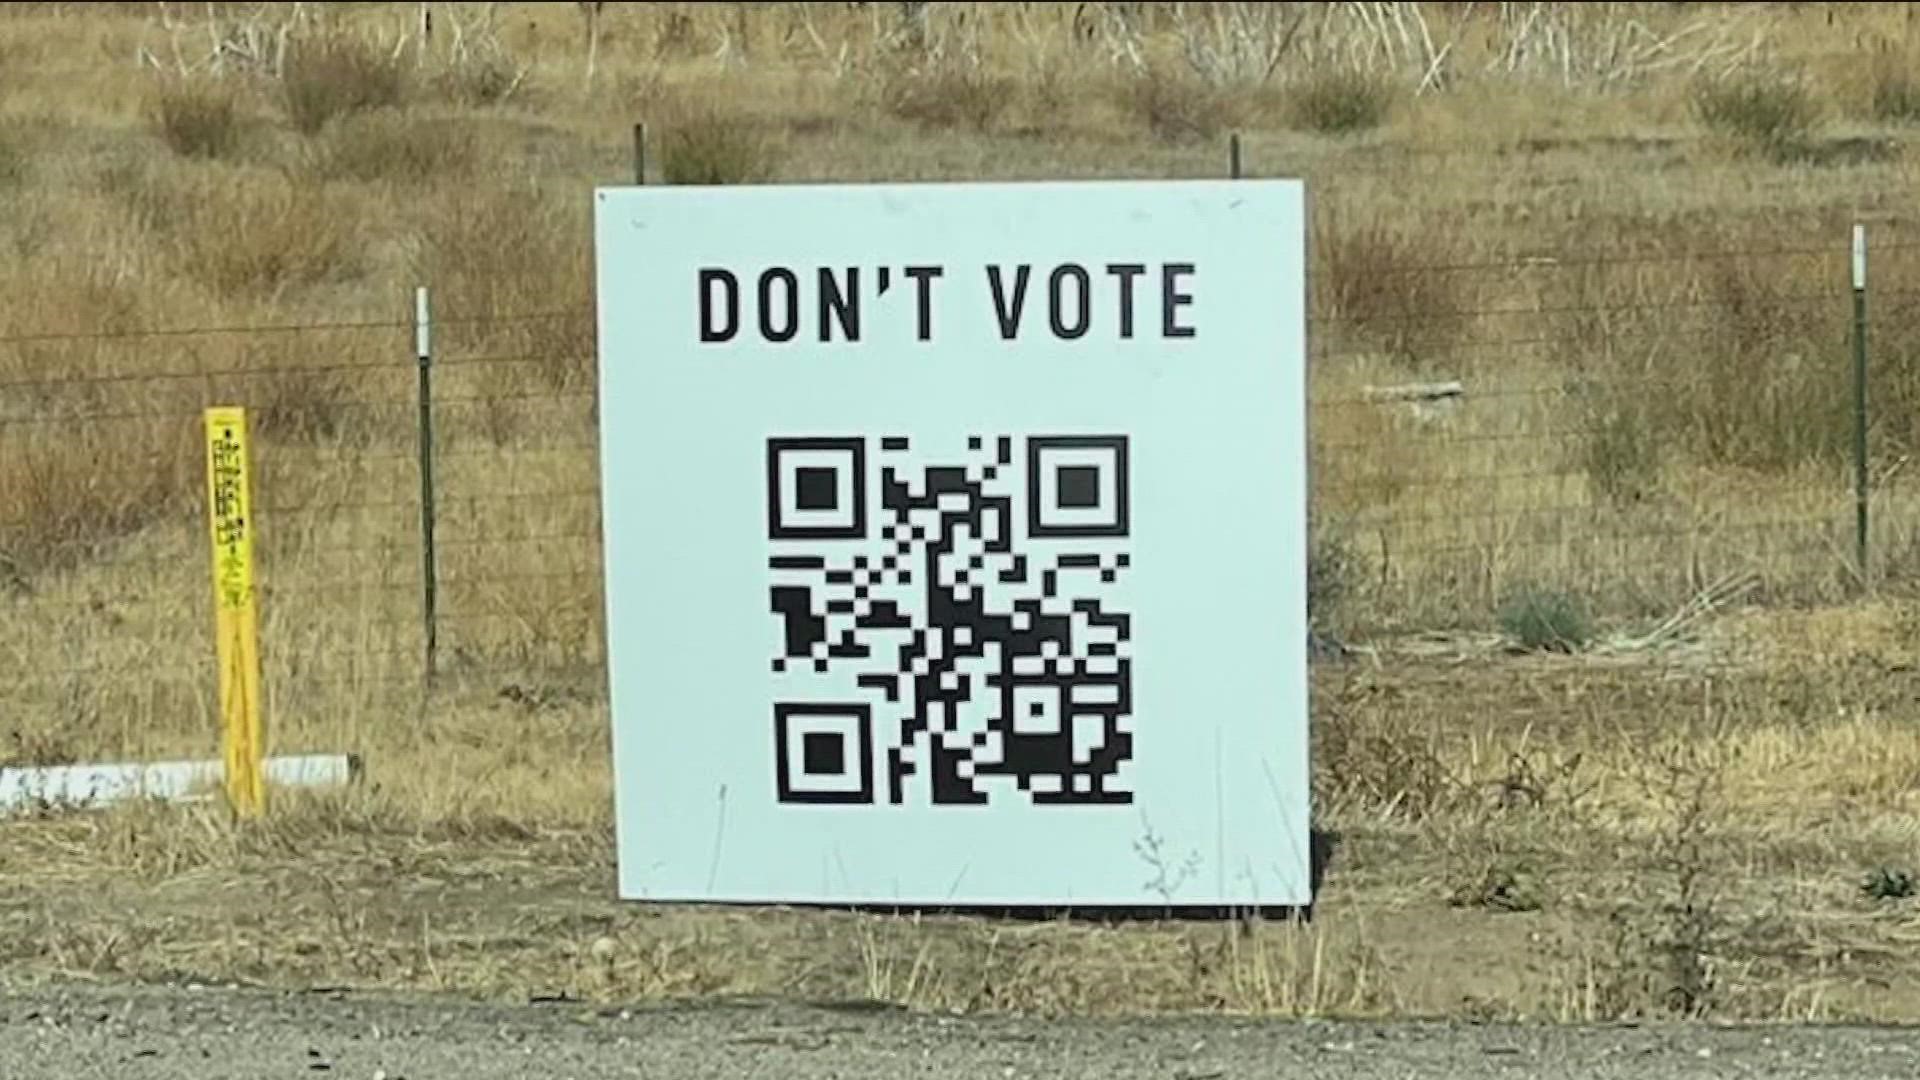 A viewer sent in this question: "There are Don't Vote QR Code signs at Gekeler and Federal Way today. Who is behind these signs?" Which prompted KTVB to investigate.